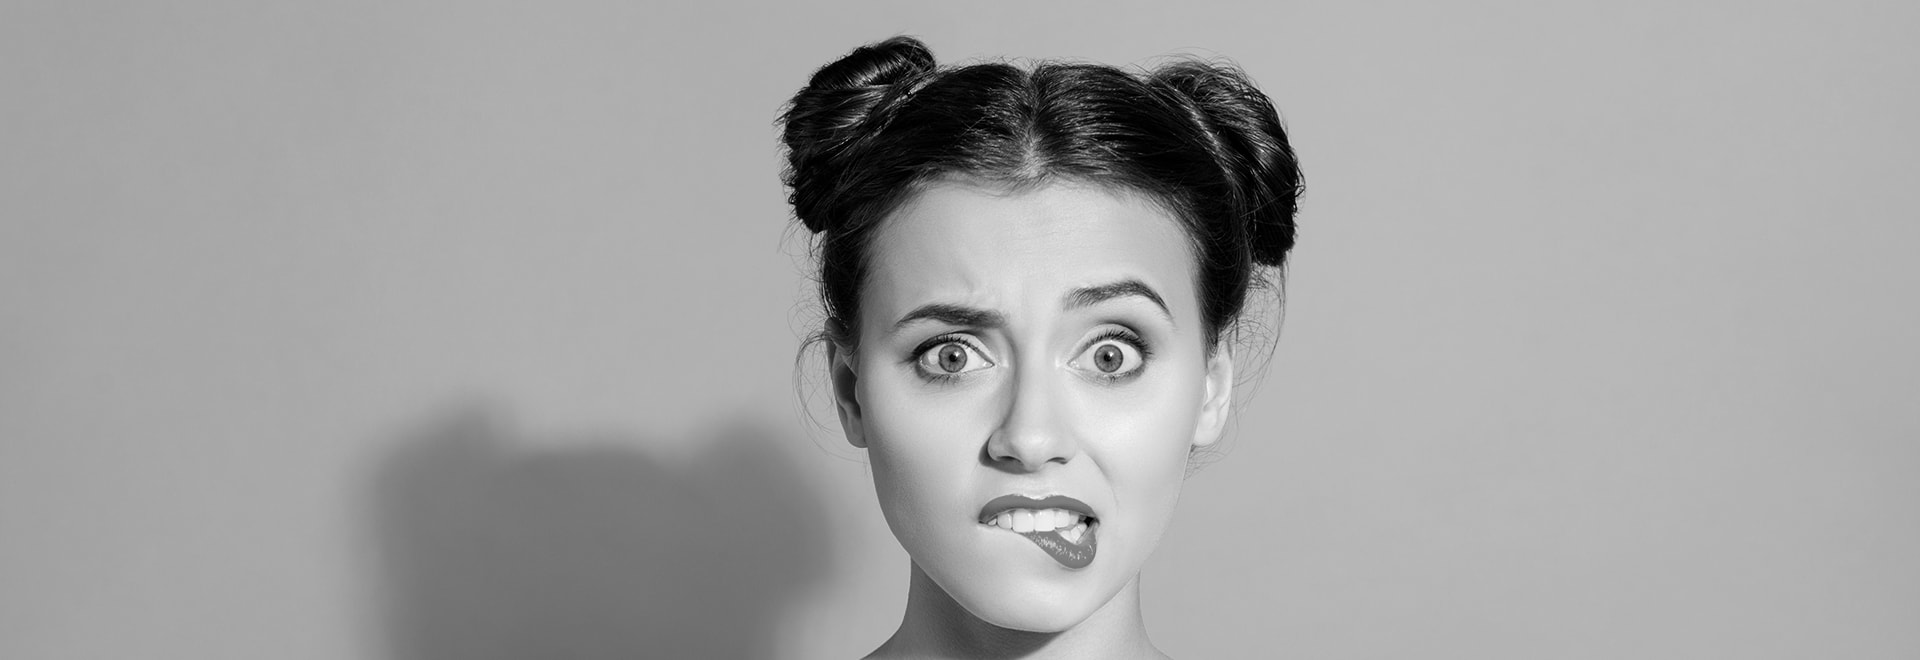 The black and white photo of a confused young woman with dark hair and two buns on her head